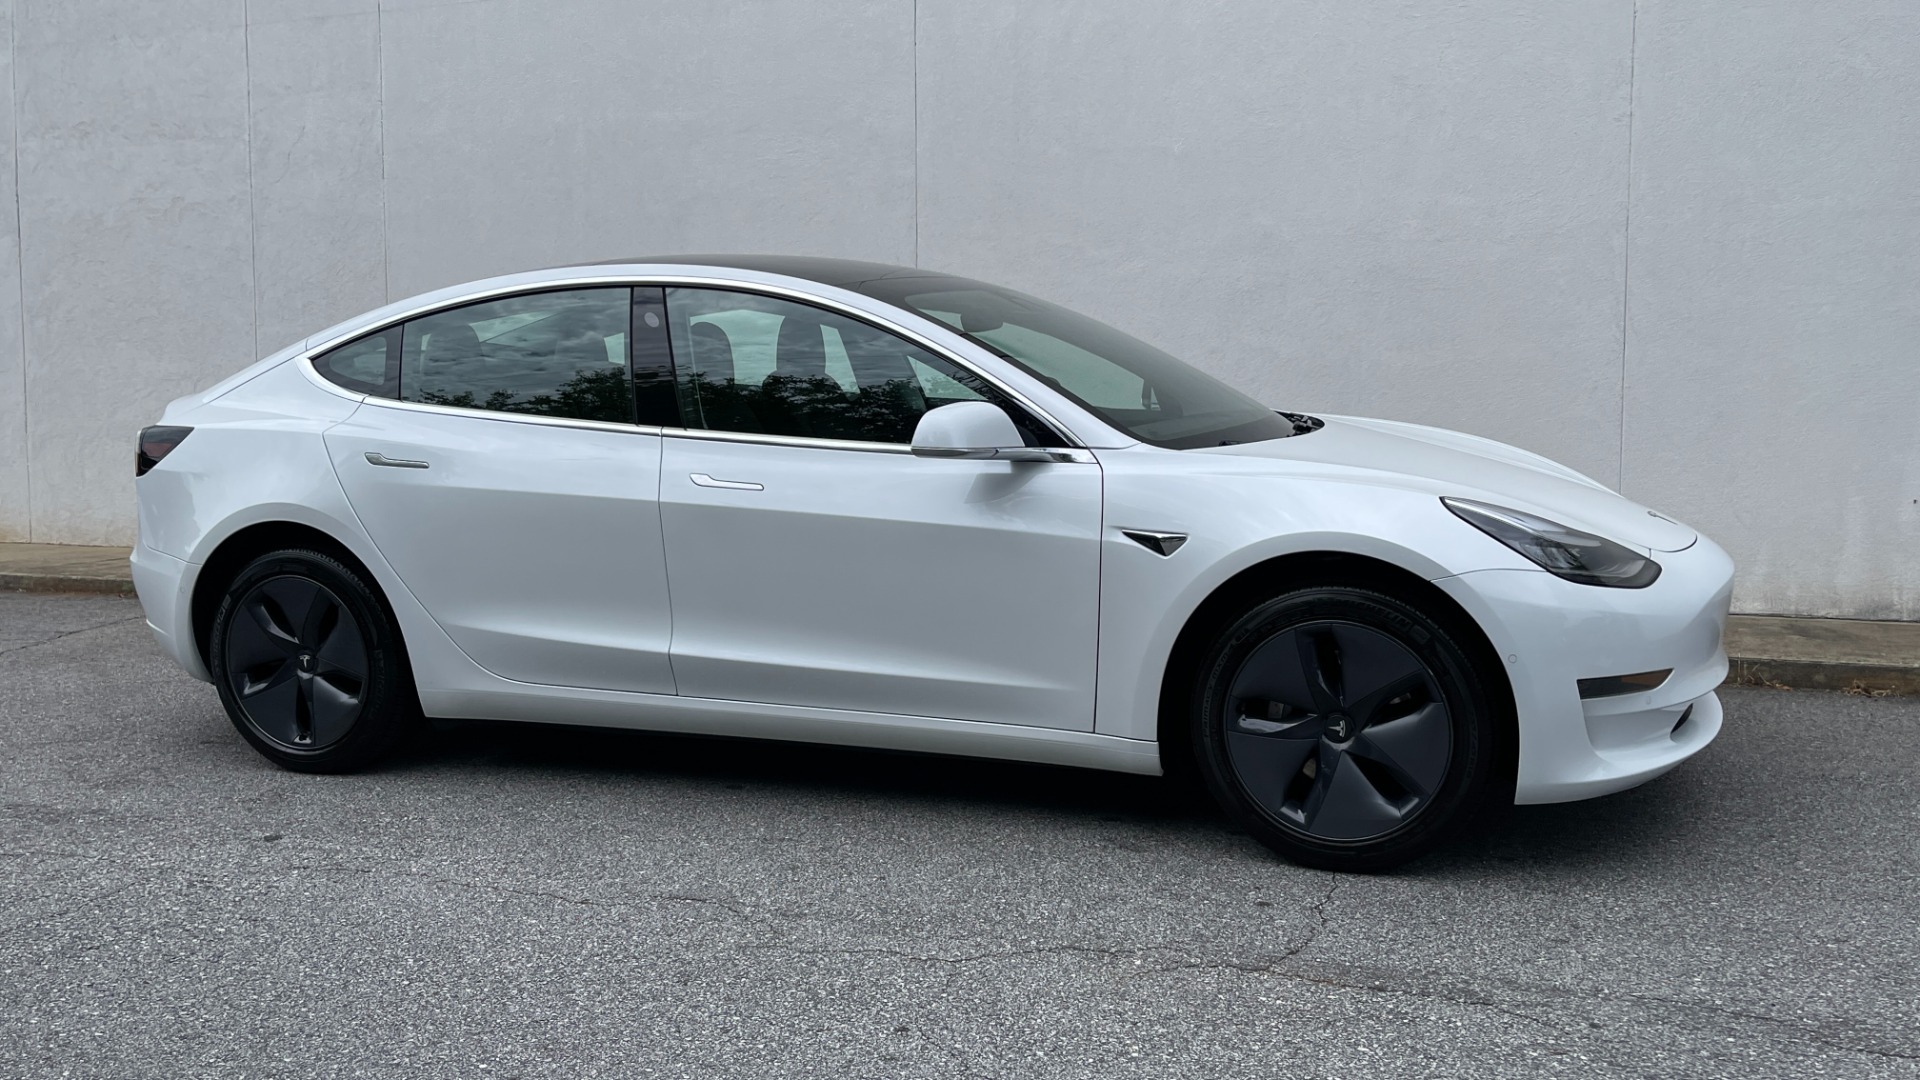 Used 2020 Tesla Model 3 STANDARD RANGE PLUS / AUTOPILOT / STANDARD CONNECTIVITY / PEARL WHITE for sale $46,995 at Formula Imports in Charlotte NC 28227 3